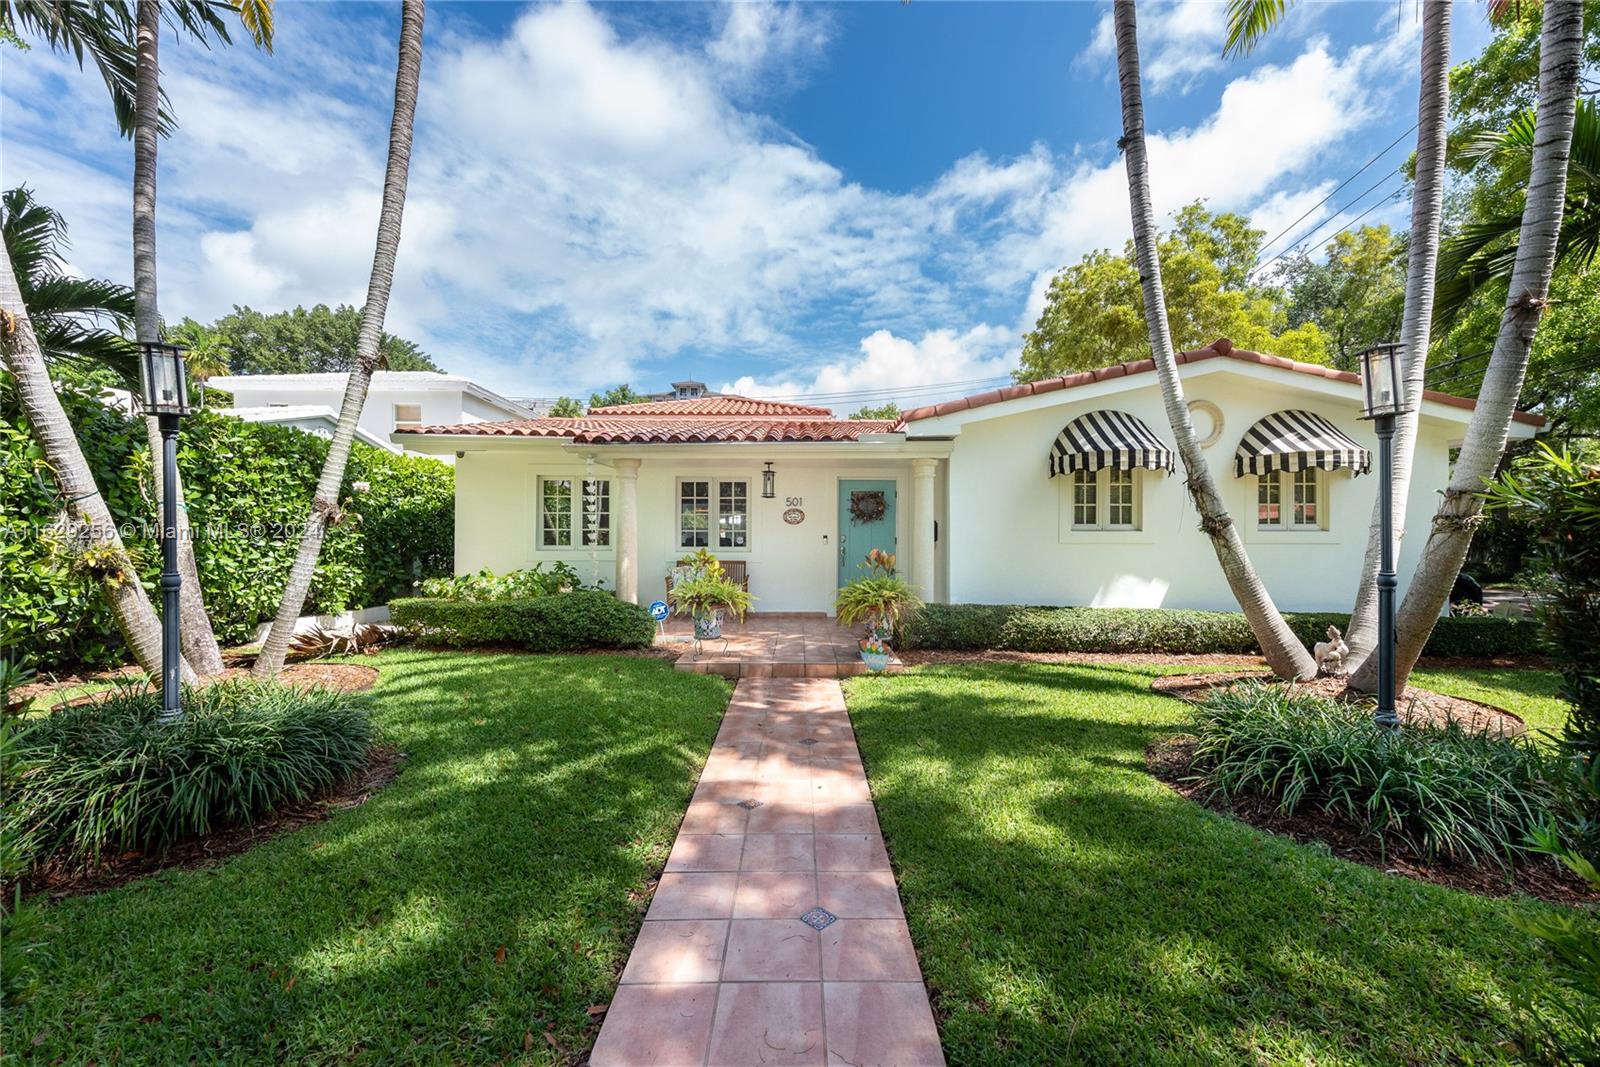 This lovely home is within walking distance of downtown Coral Gables, so this is Urban living at its best. The house is conveniently located on the corner of Sevilla & Hernando 3 bedrooms, and 2 baths with an updated kitchen with a center island and a large pantry. When you enter the home you are greeted by a lovely living room and open dining room area, next to the large family room with soaring 15' ceilings with incredible natural light. French doors open to a large sparkling pool and large covered patio, creating the ultimate indoor/ outdoor living space for entertaining friends and family. Oversized garage, impact windows. Adjusted sq. ft. is 2,338. The house is in the freebee zone and close to the farmer's market, Biltmore Hotel, and Coral Gables Youth Center.